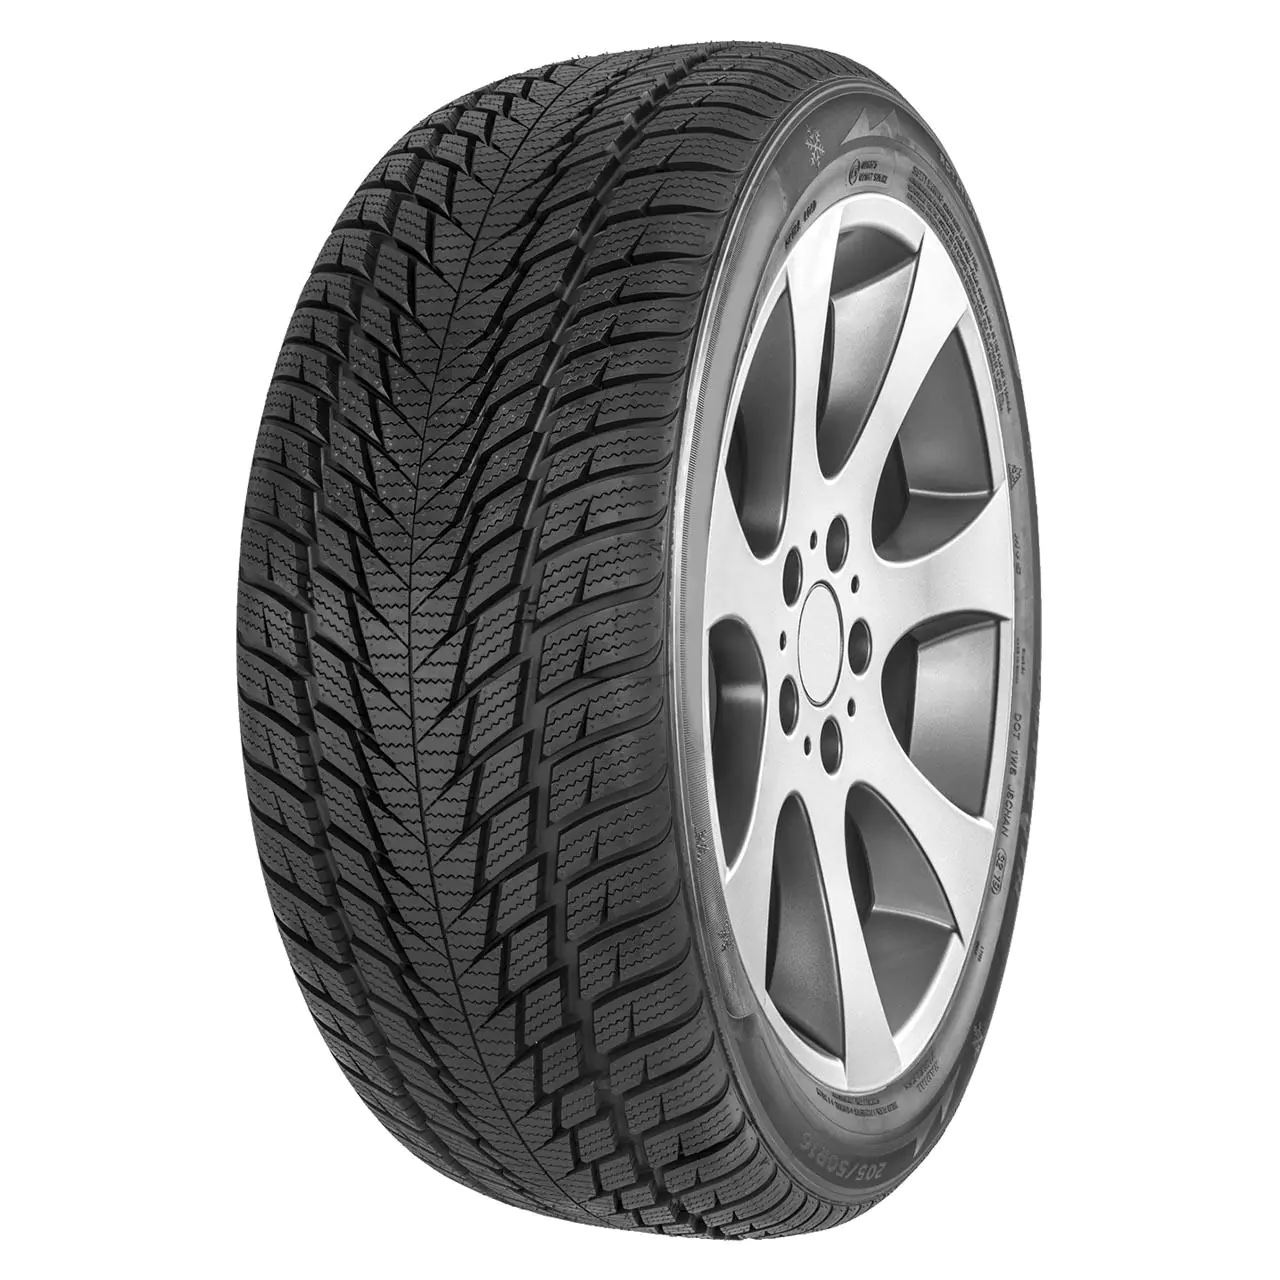 Gomme 4x4 Suv Fortuna 265/45 R21 108V GOWIN UHP3 XL M+S Invernale